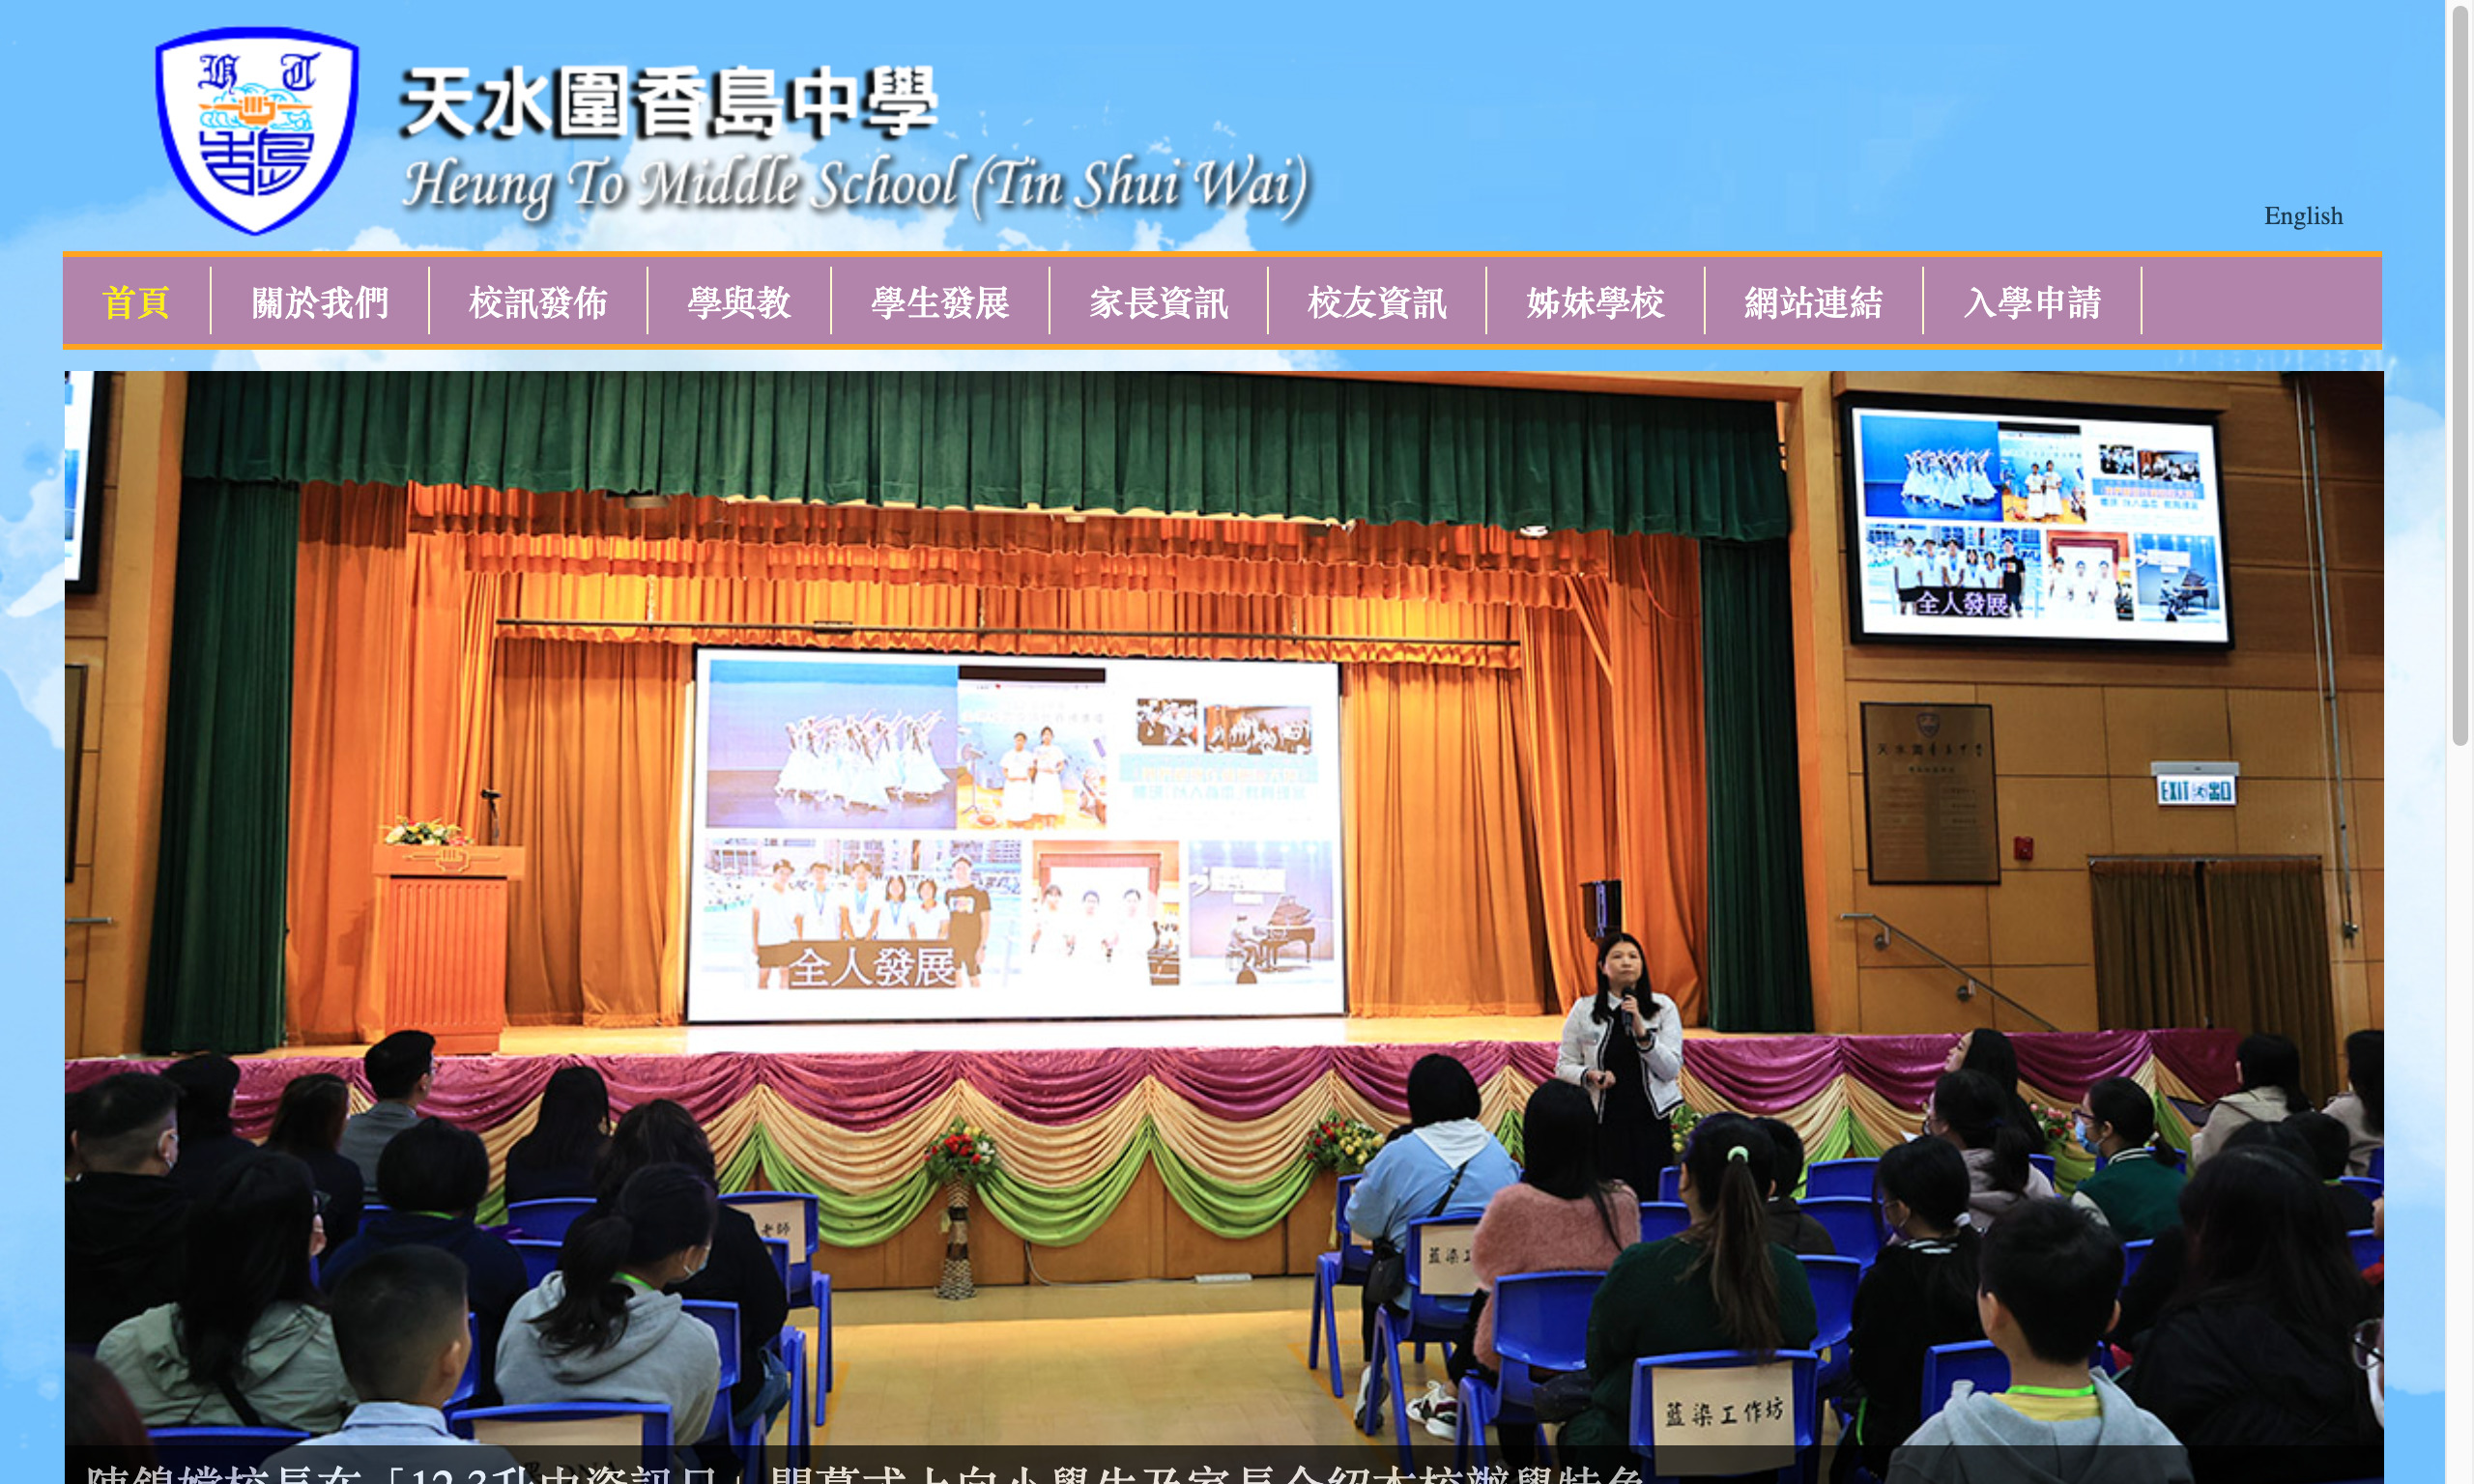 Screenshot of the Home Page of Heung To Middle School (Tin Shui Wai)